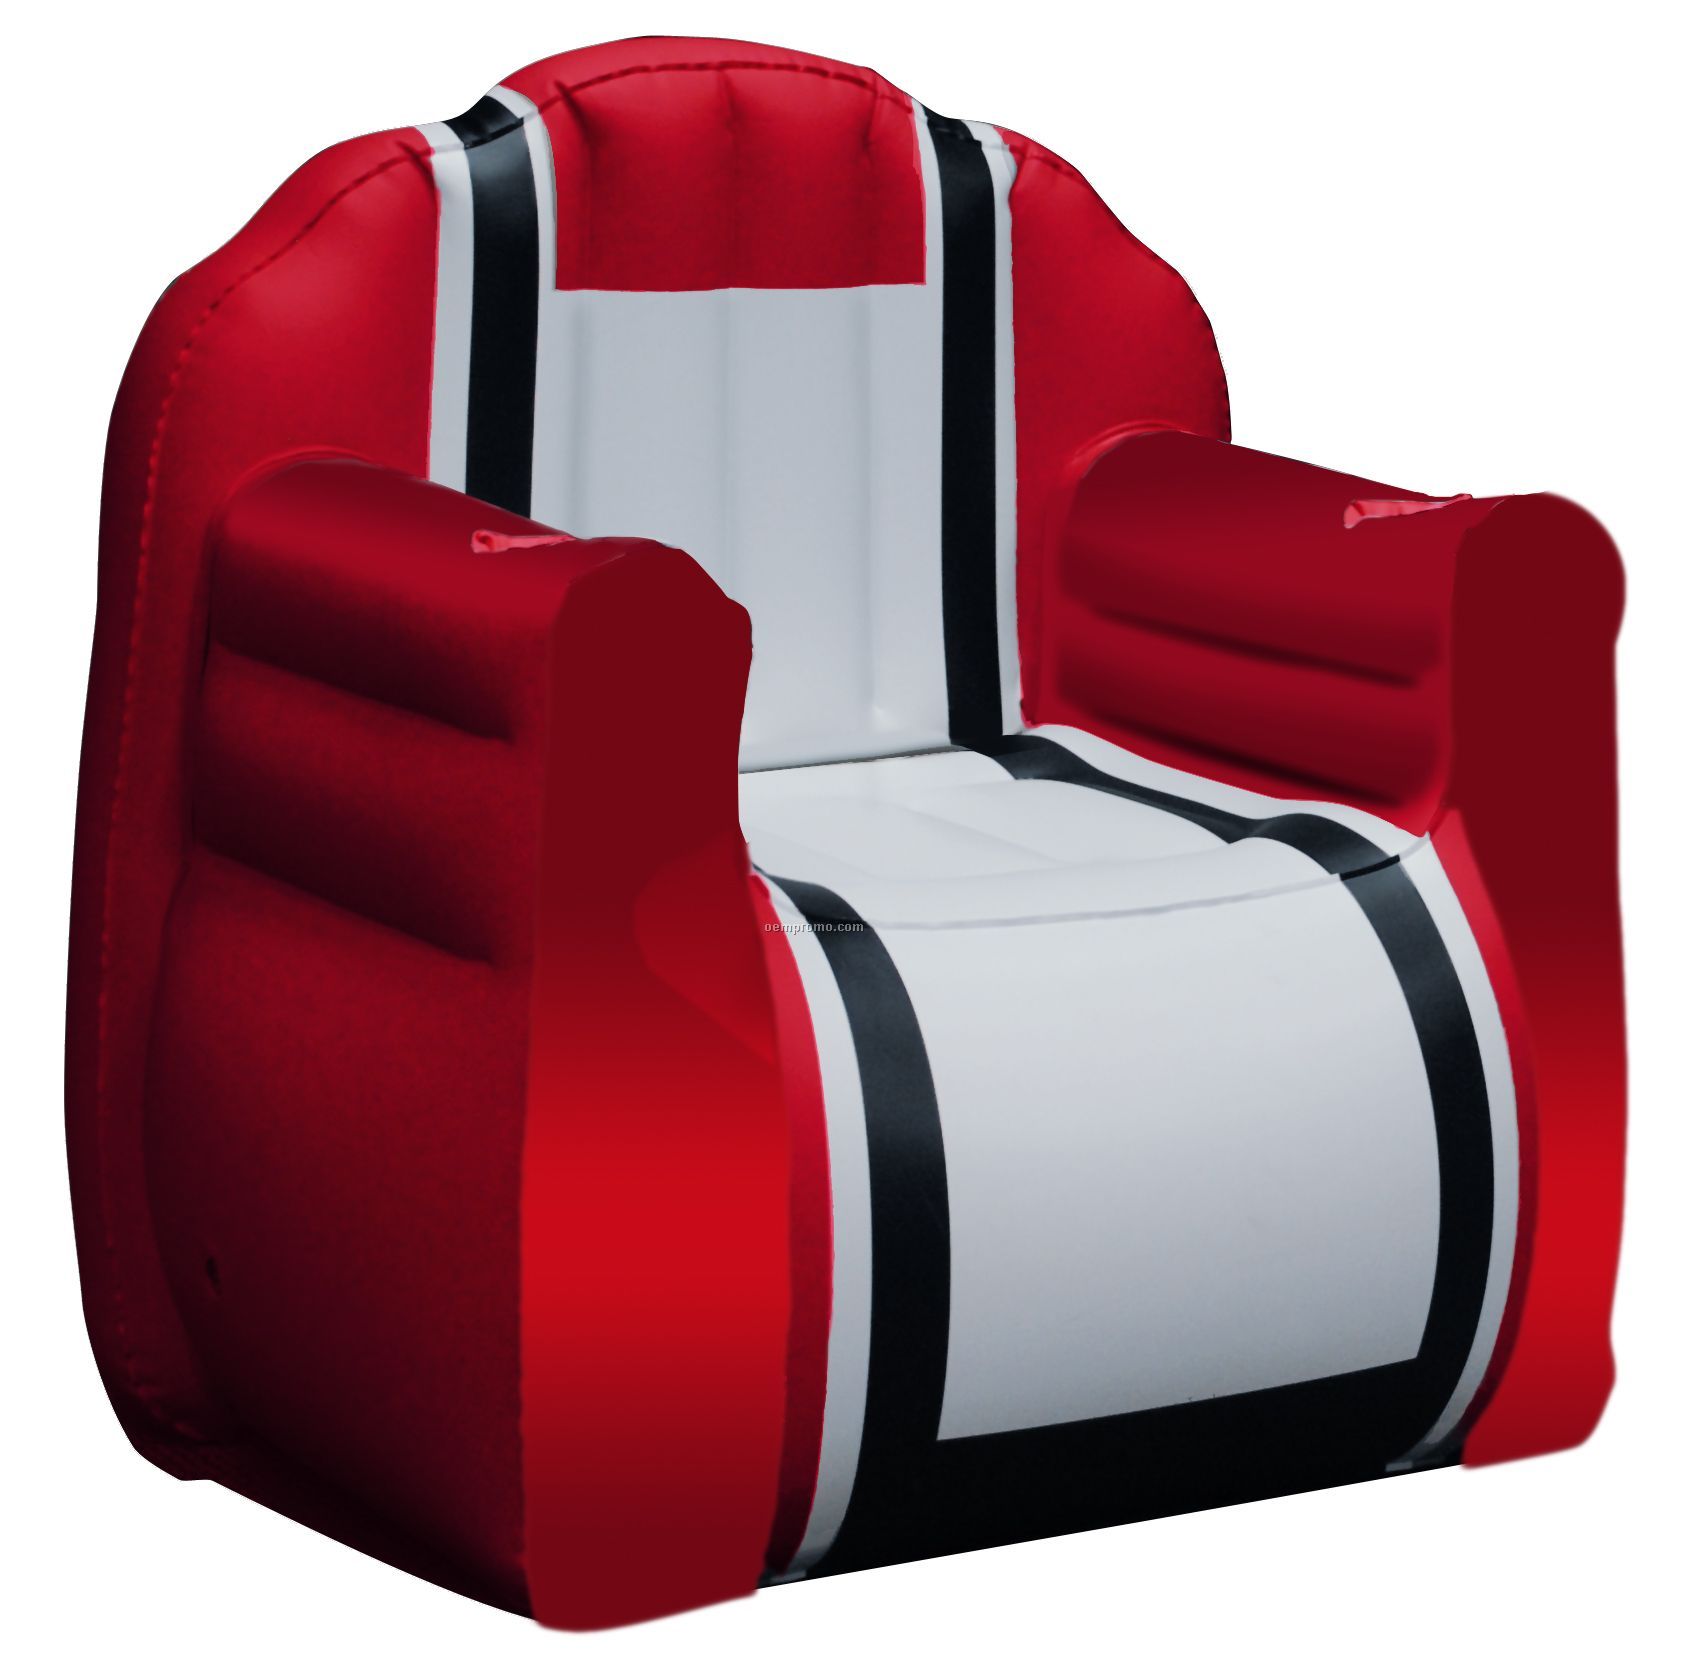 Inflate-a-seat "Chair": Red/White/Black